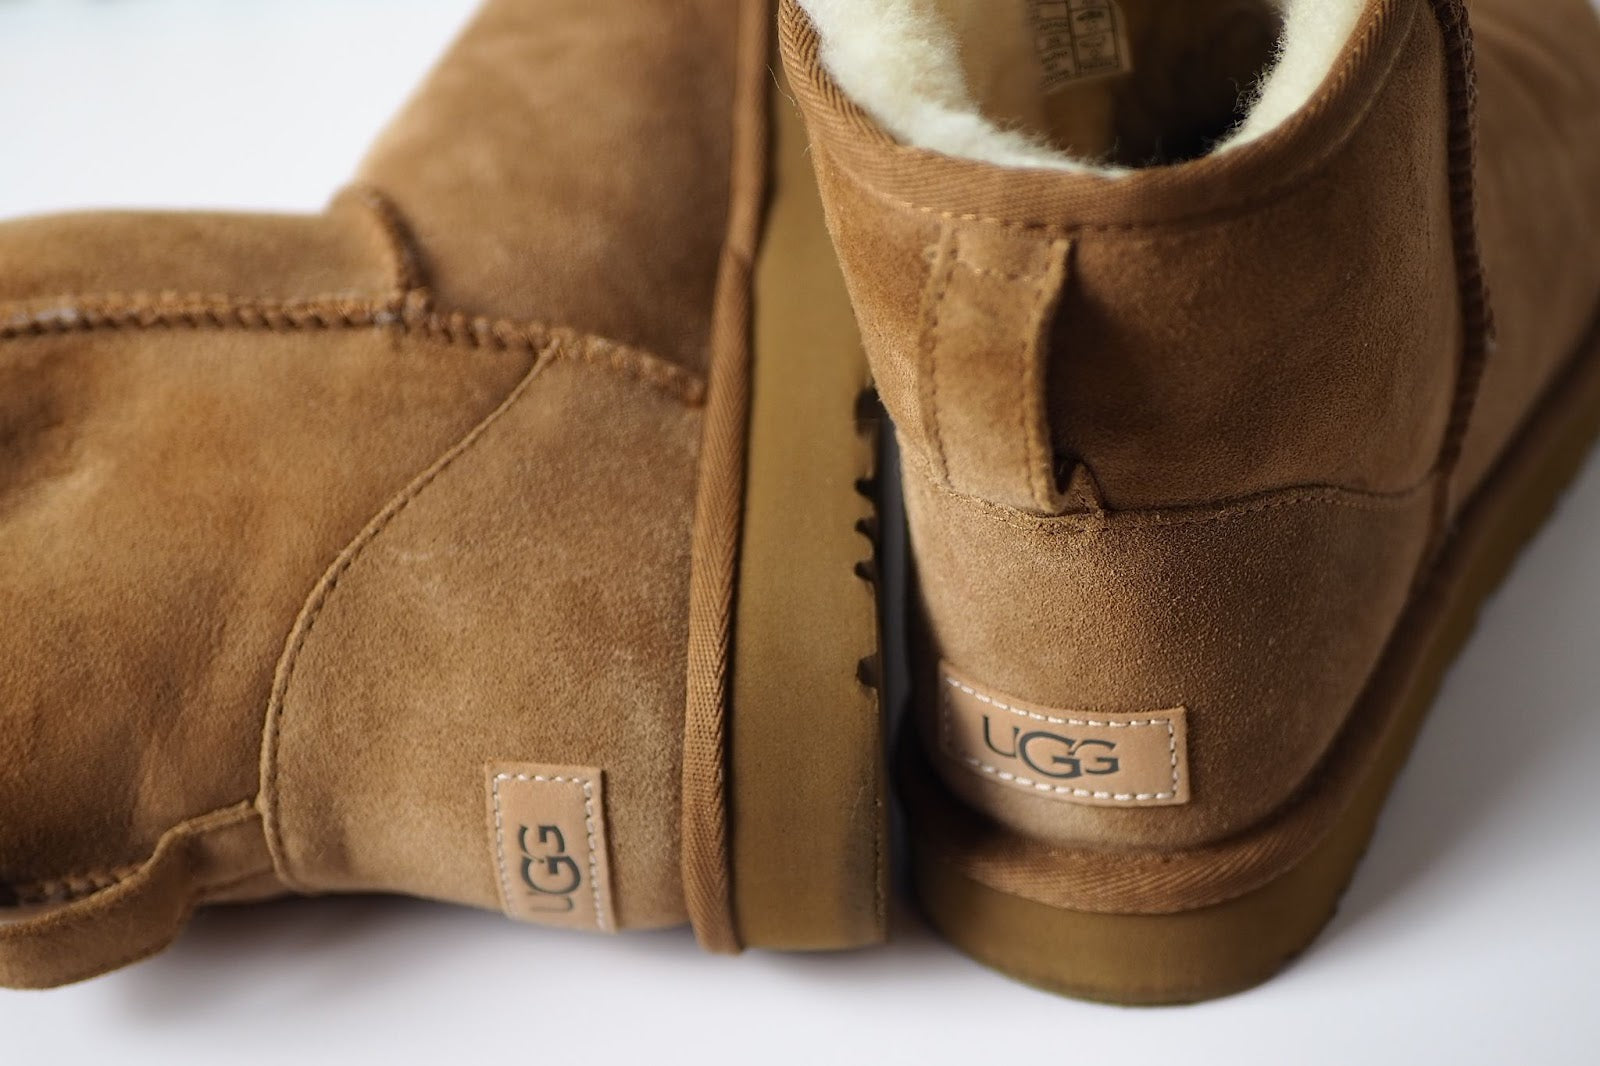 How to Clean UGGs and Keep Them Looking Fresh